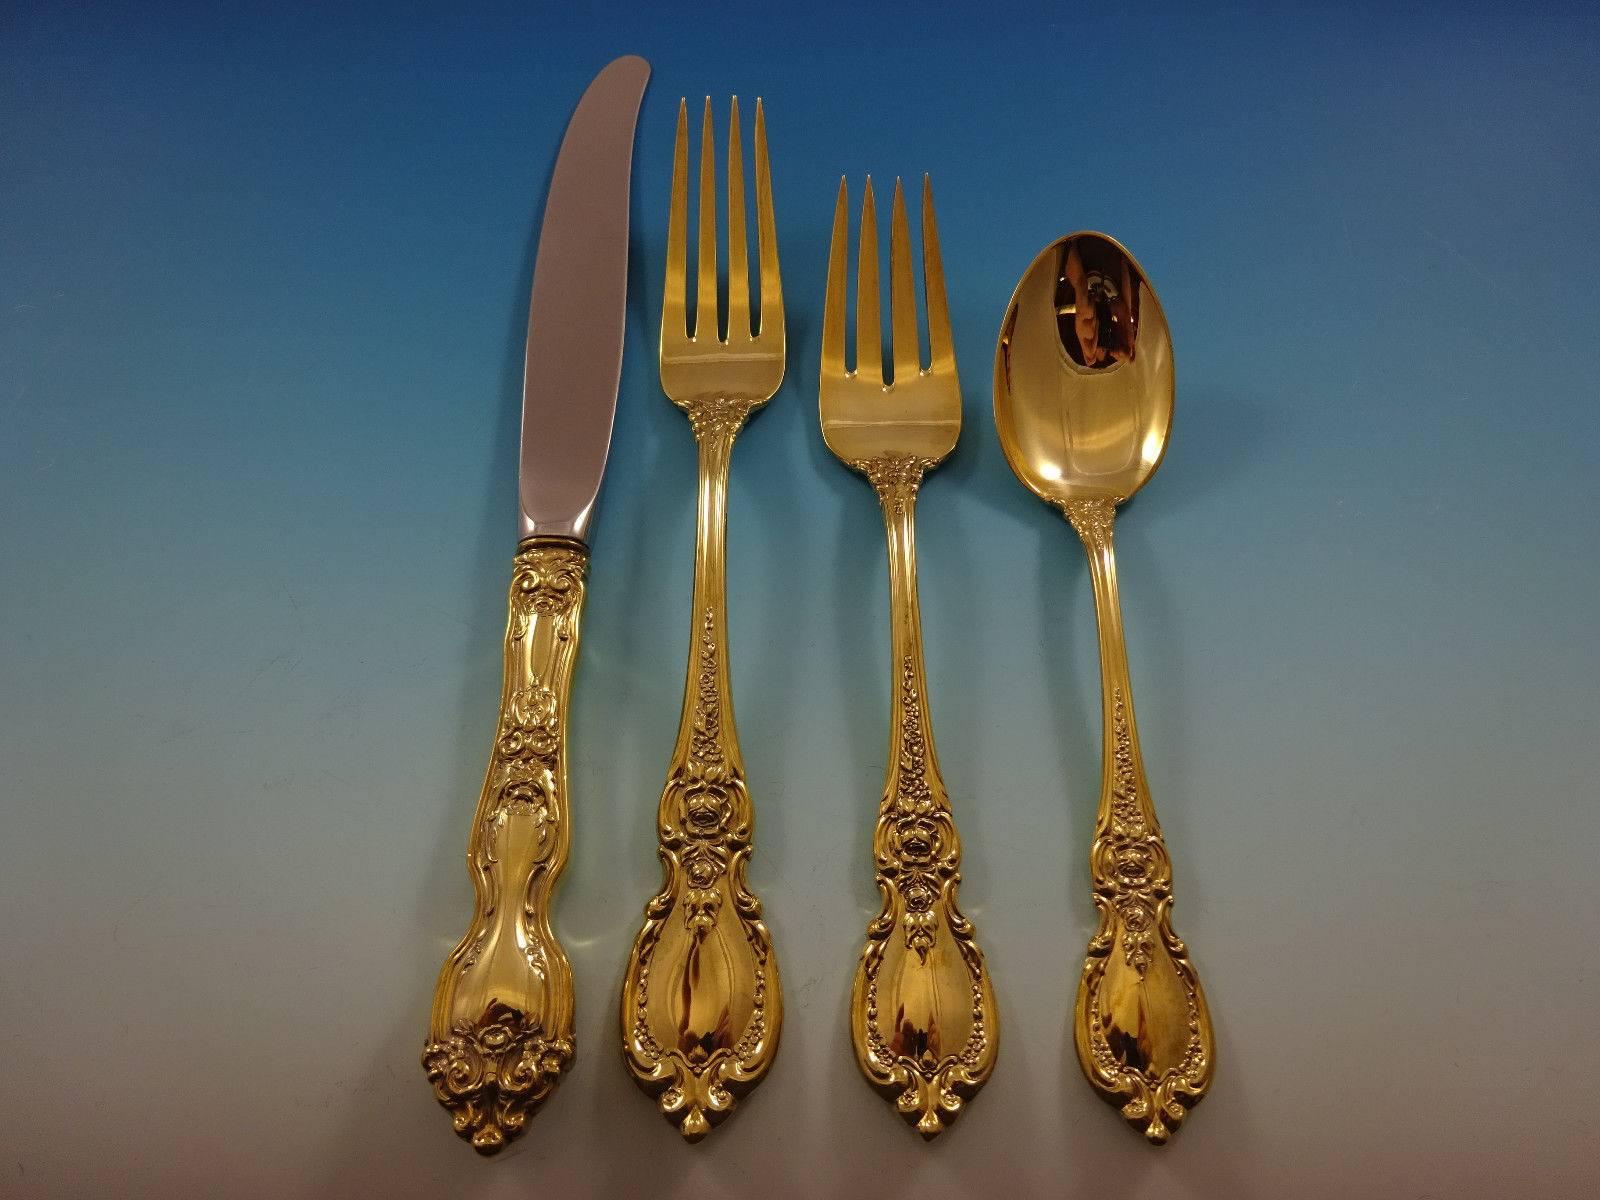 Stunning Charlemagne gold by Towle sterling silver flatware set-48 pieces. Gold flatware is on trend and makes a bold statement on your table. This set is vermeil (completely gold-washed over sterling silver) and includes:

12 knives, 9